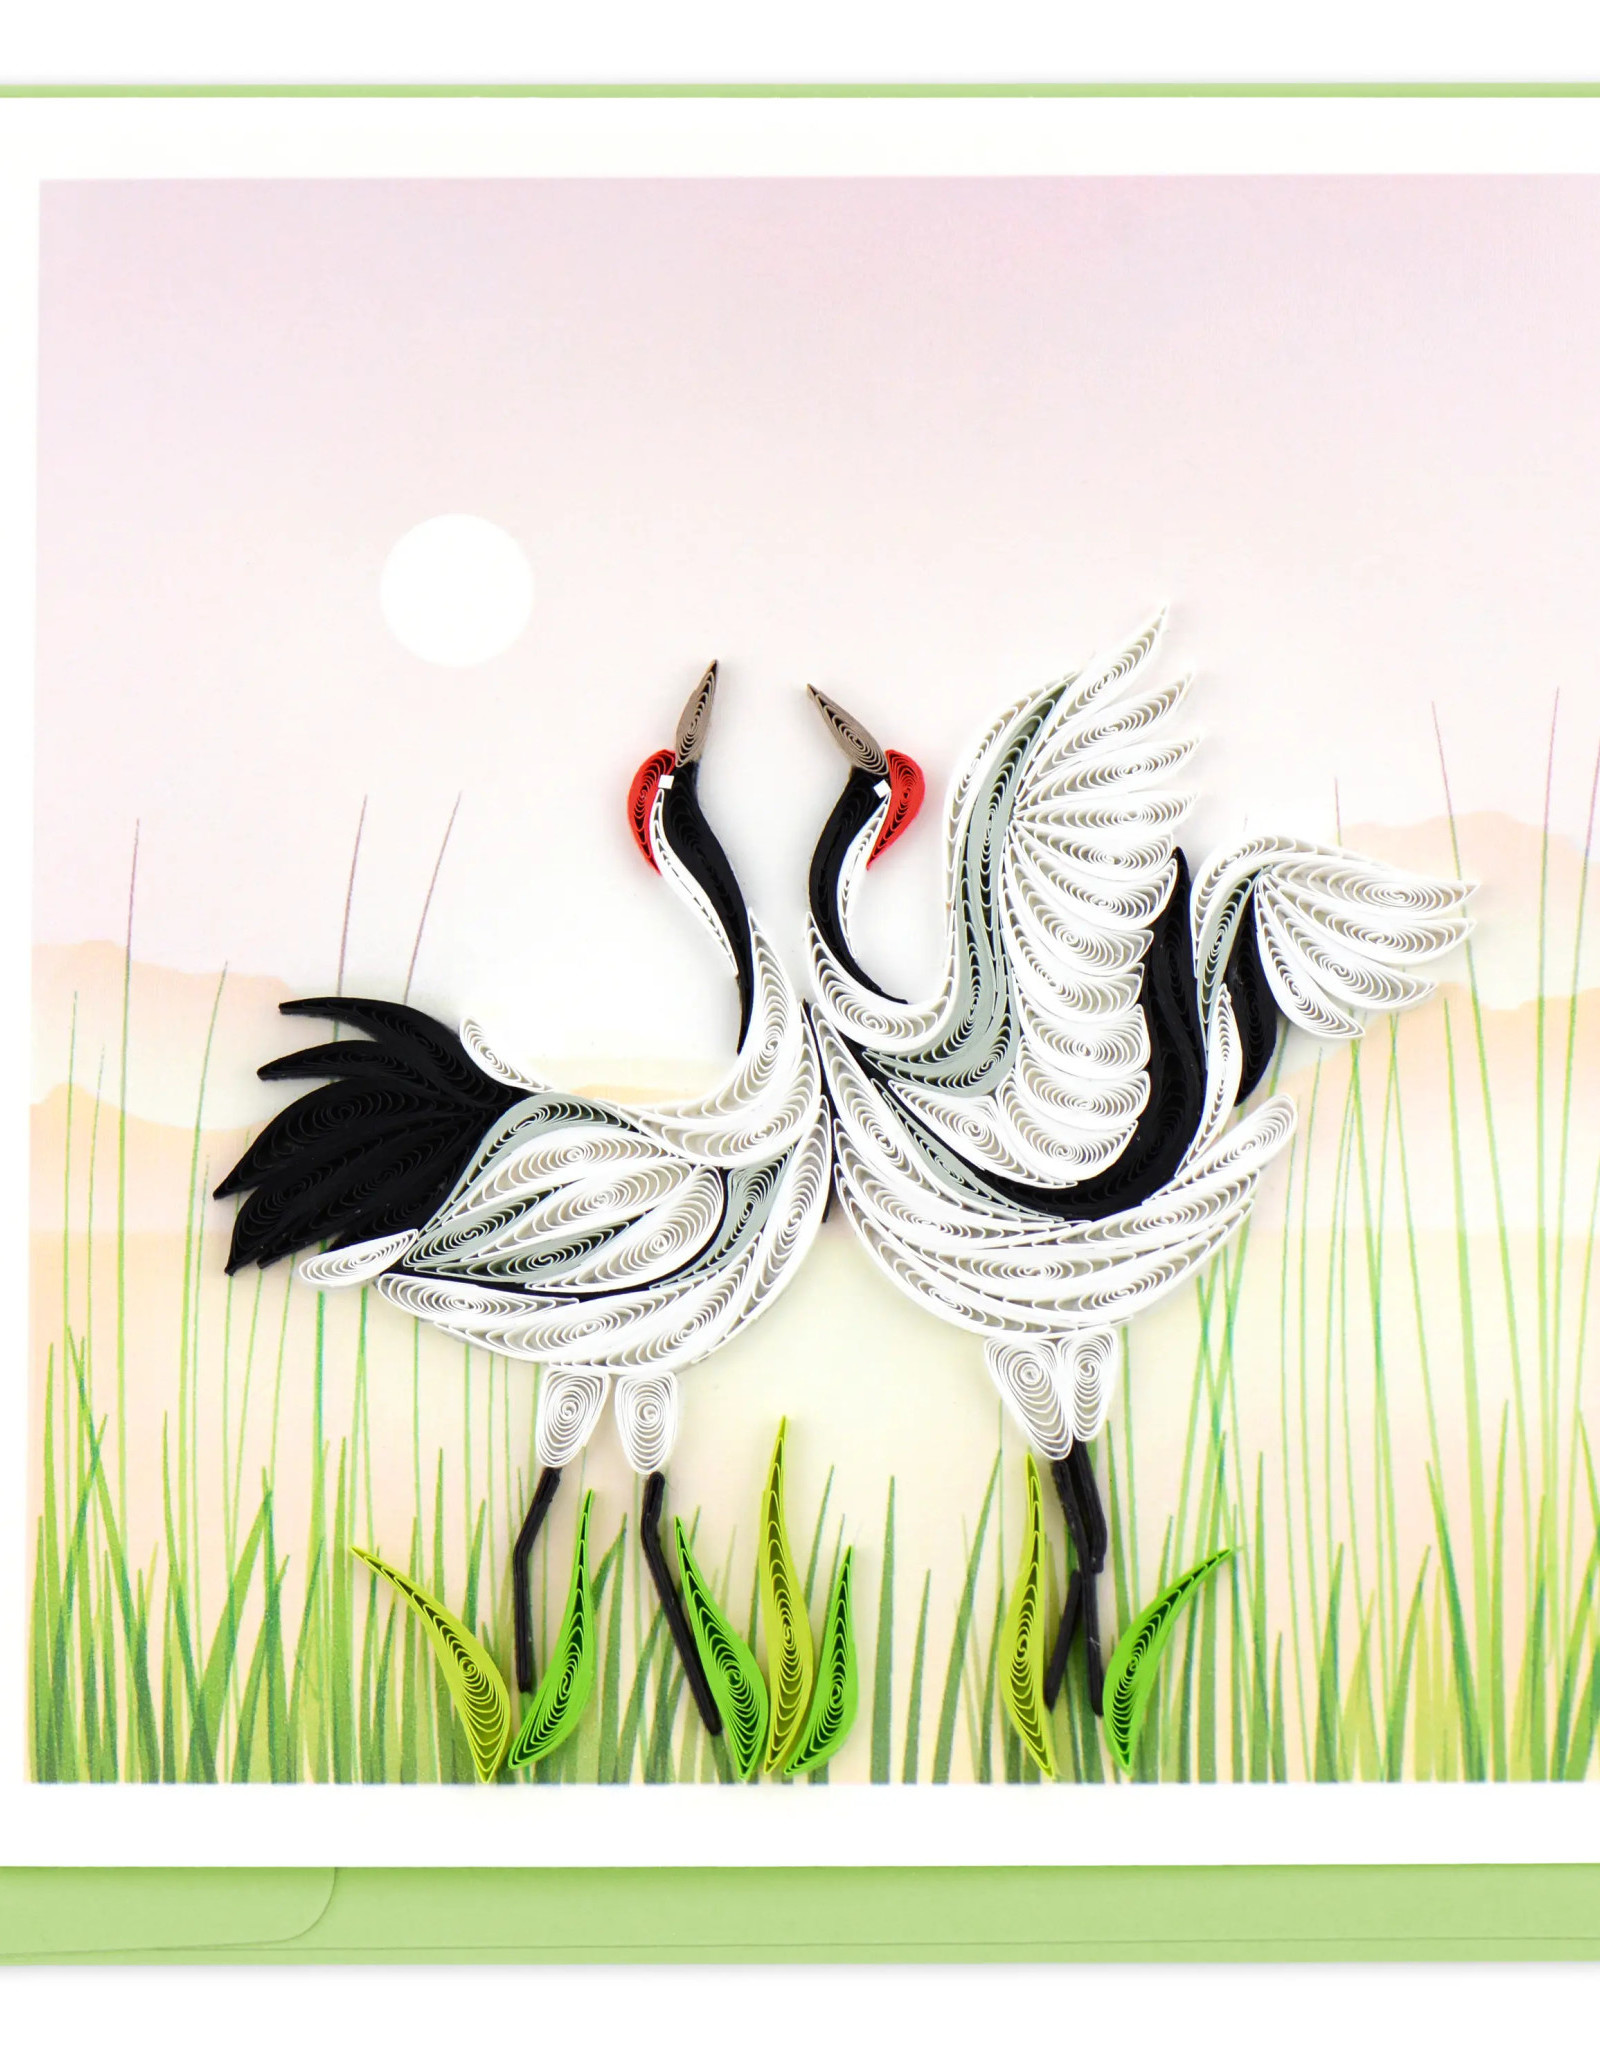 Quilling Card Quilled Black & White Cranes Card